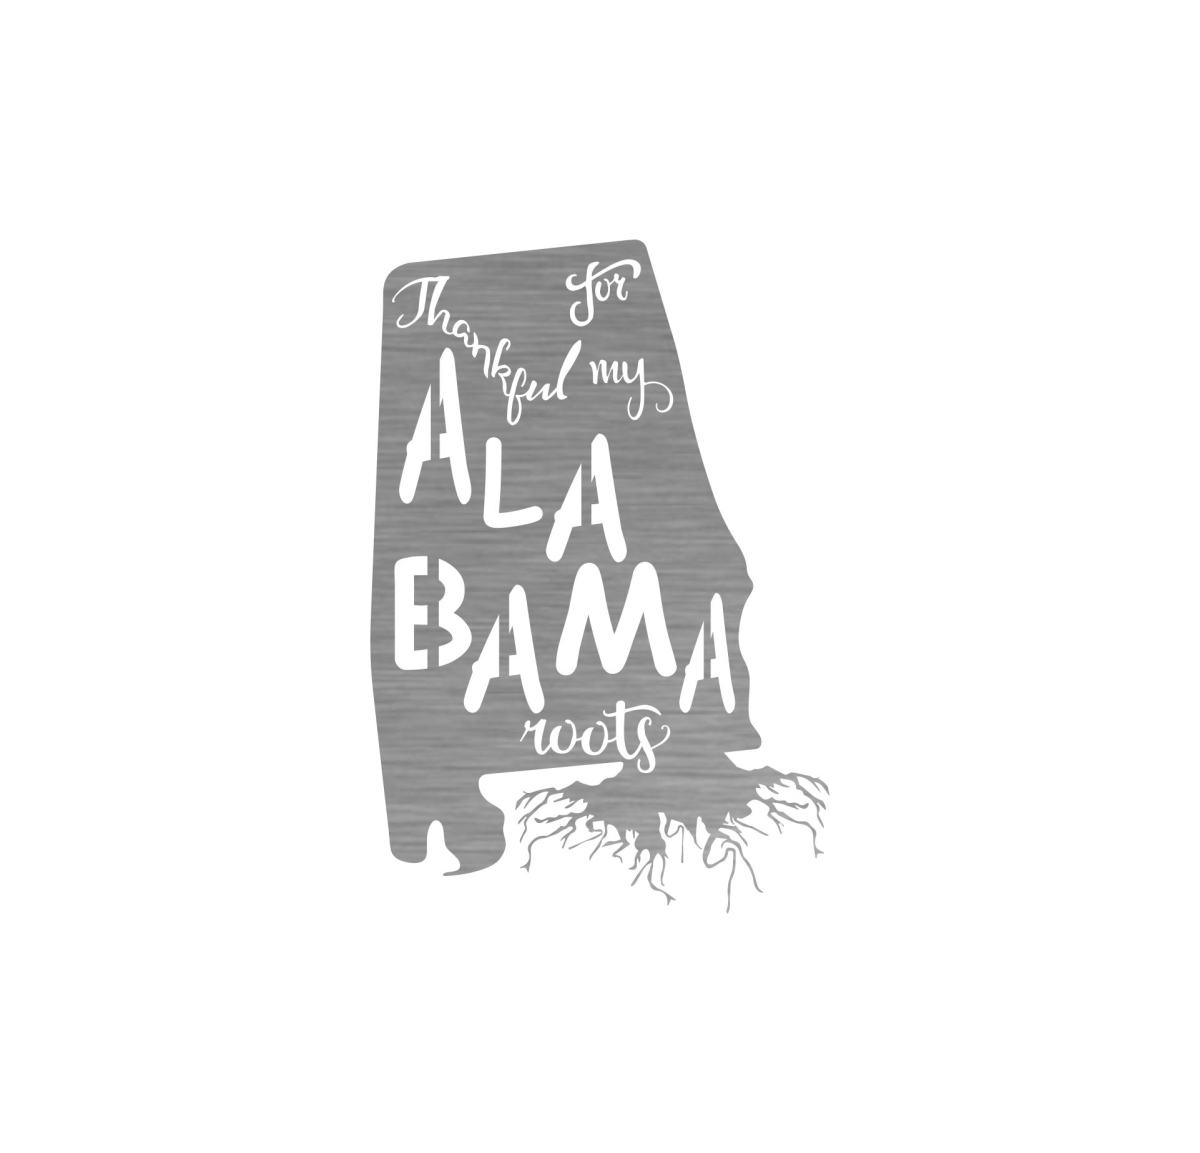 Alabamaroots-30ss 30 In. State Alabama Roots Steel Laser Cut Wall Art In Shiny Natural Steel